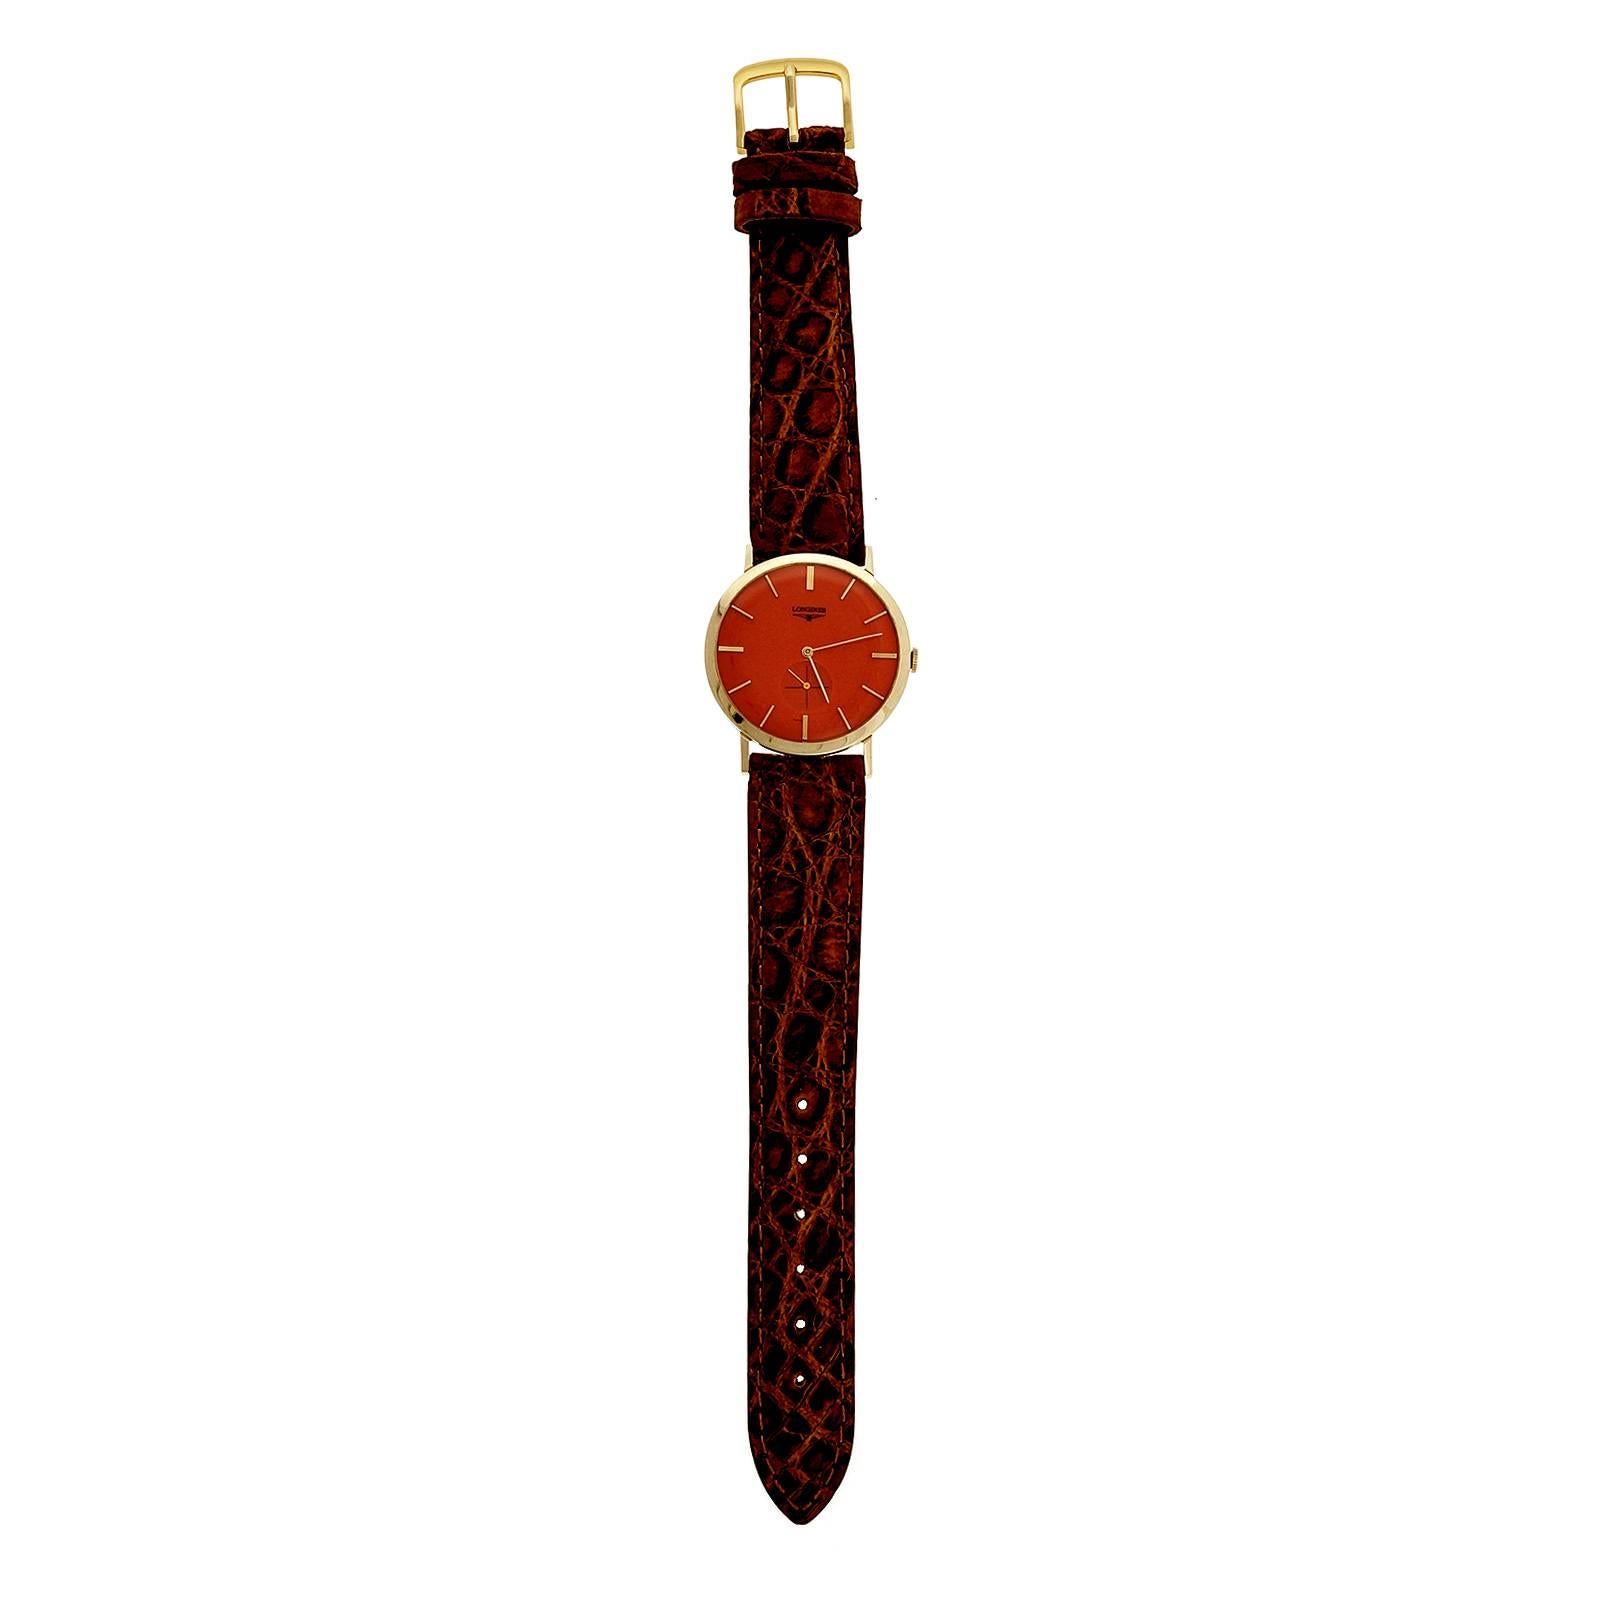 1960’s Longines manual wind wrist watch in a simple classic case with Longines dial refinished in a custom Peter Suchy process by multiple layers of bright high luster vivid orange finish.

14k yellow gold
25.7 grams
Lug tip to ring: